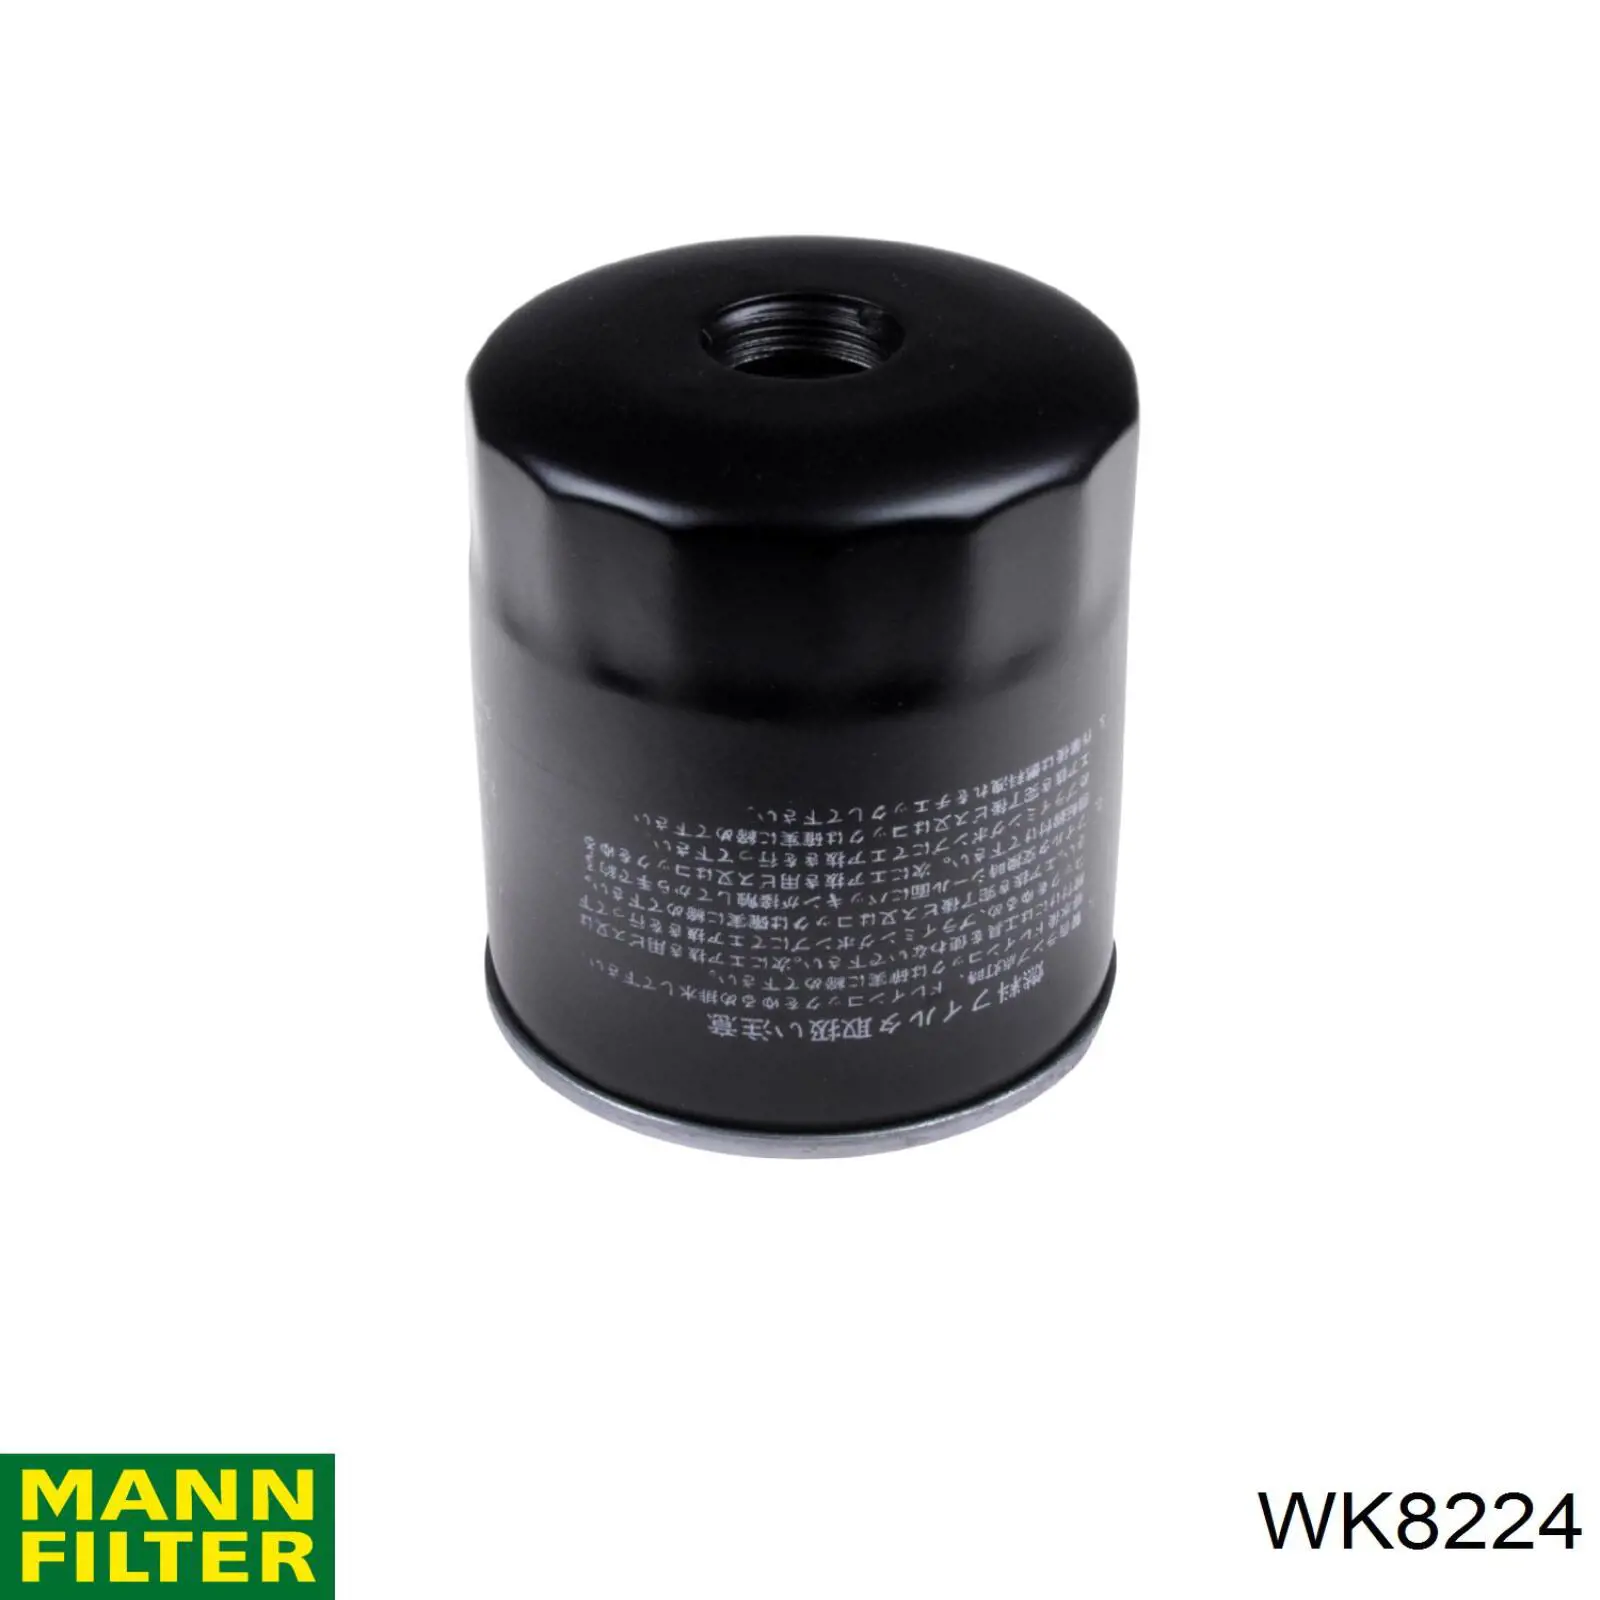 Filtro combustible WK8224 Mann-Filter